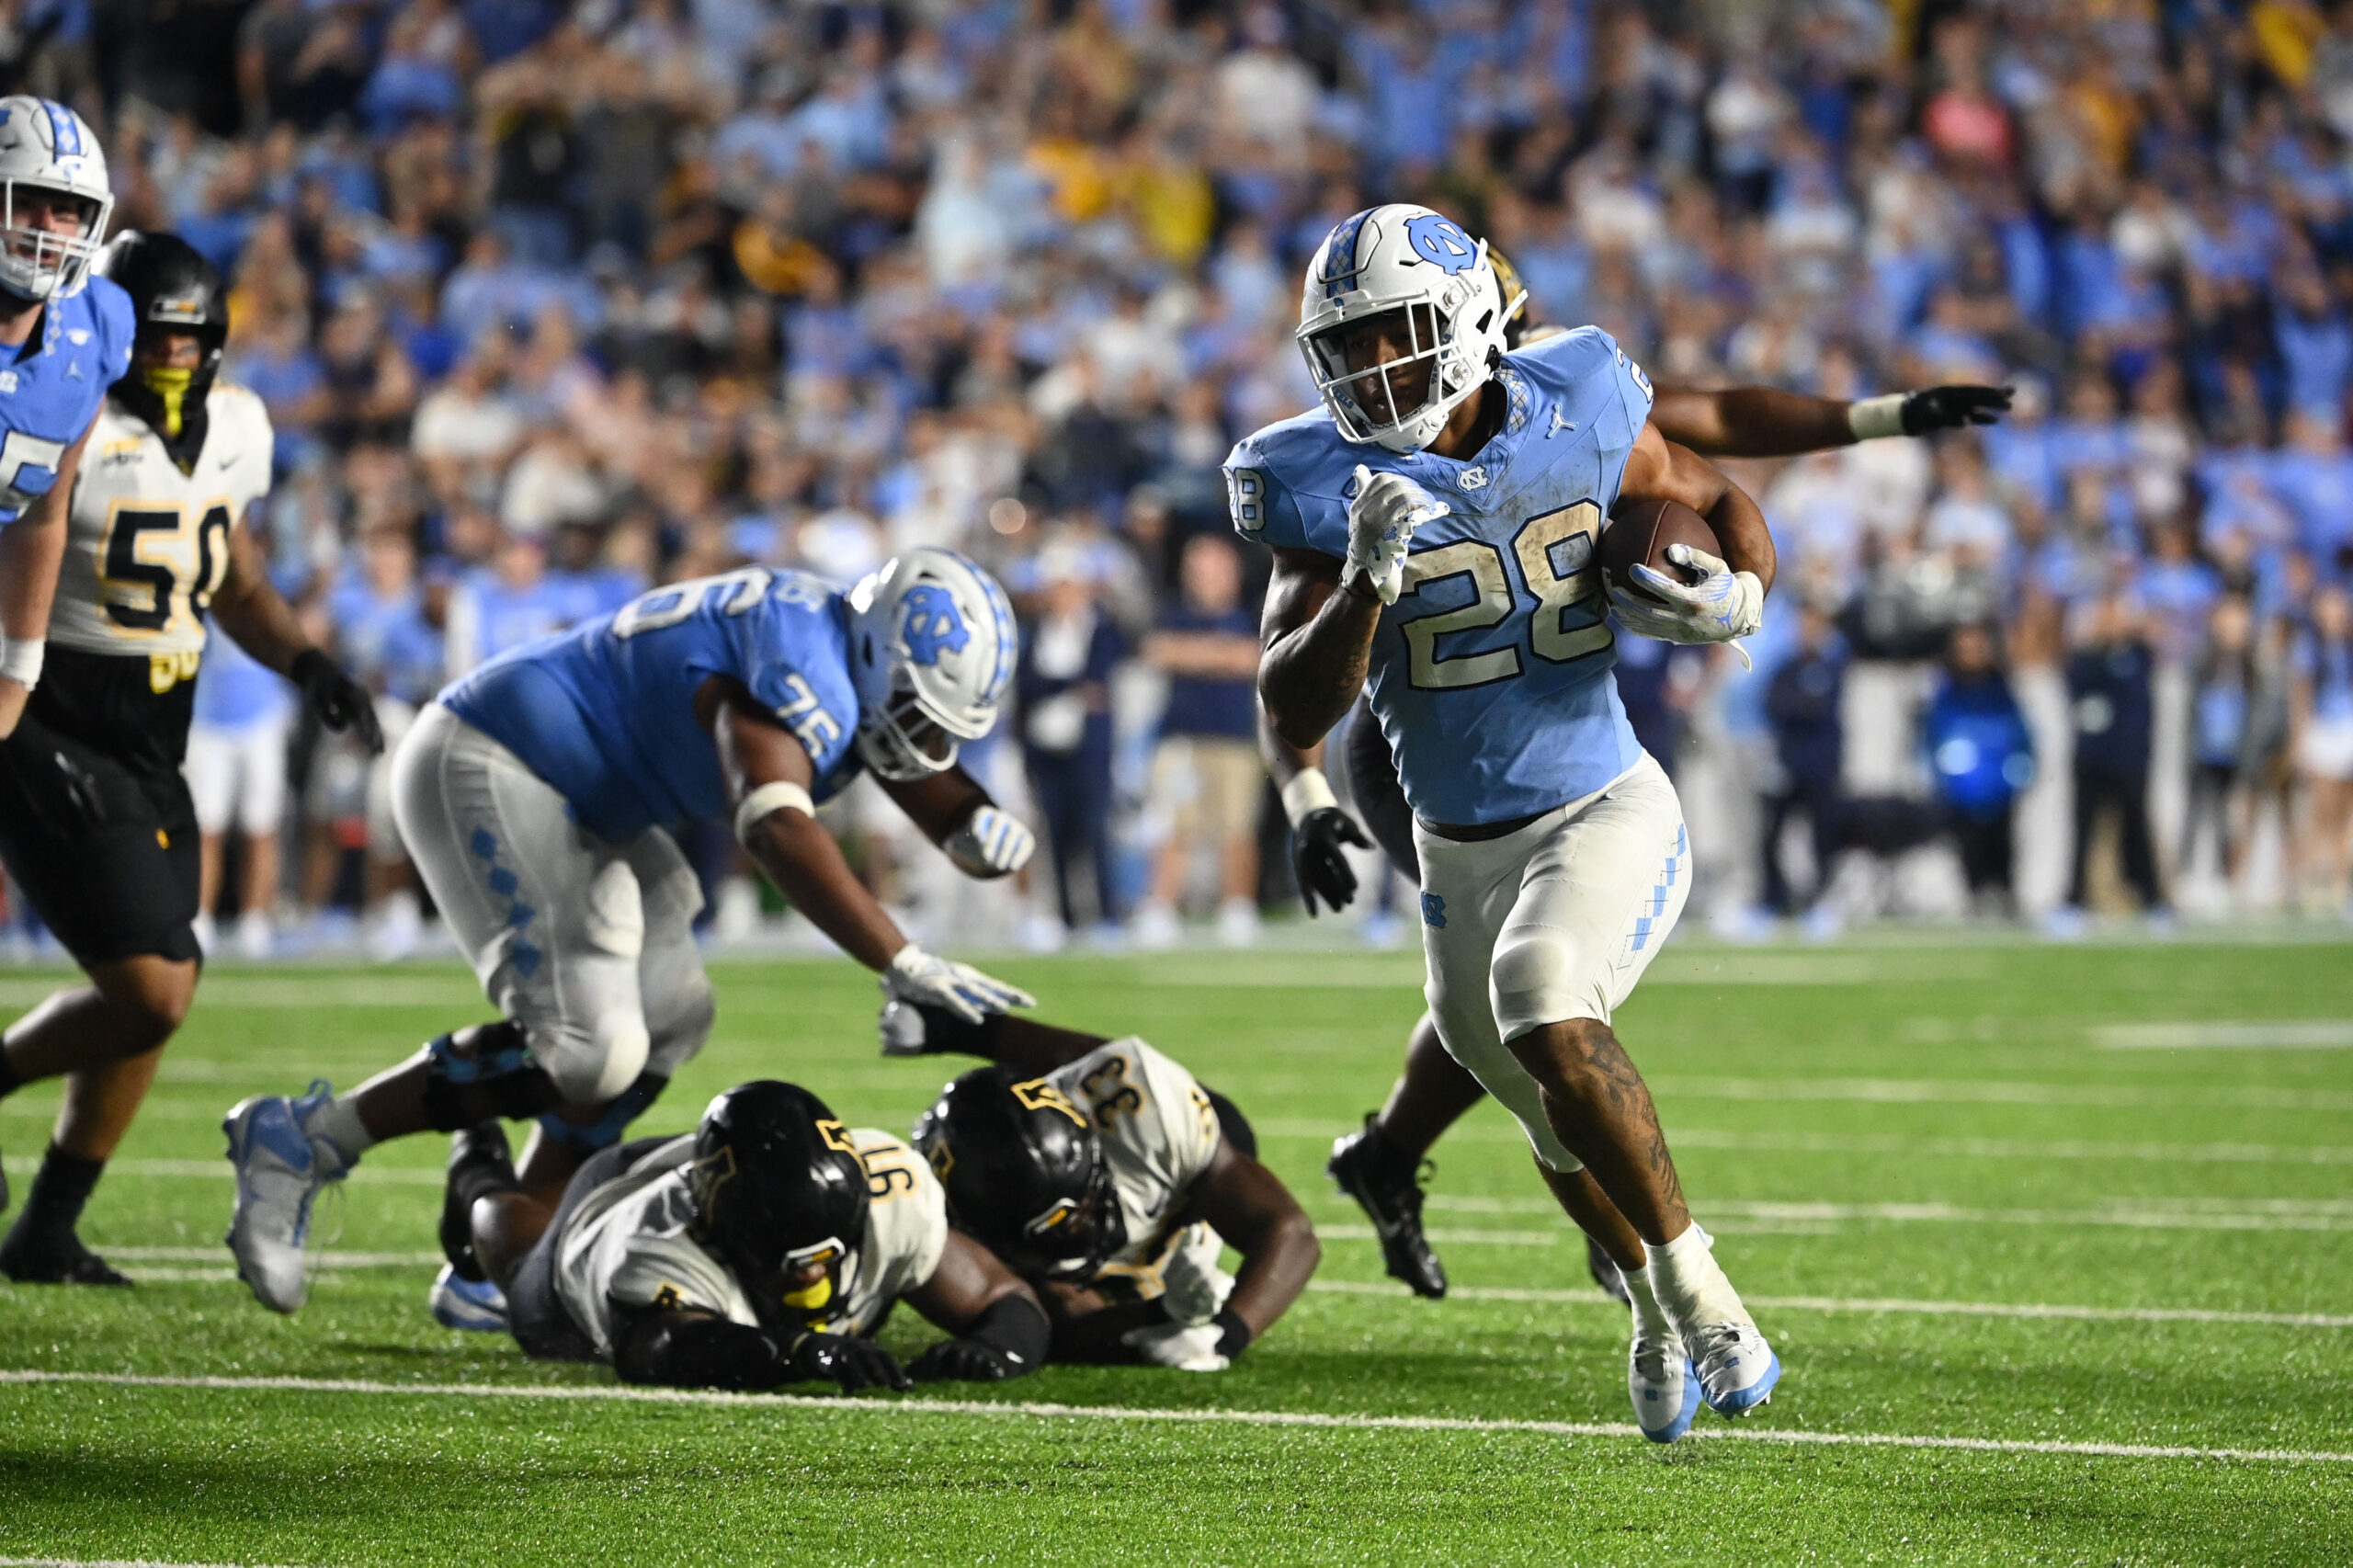 UNC Football: Offensive Keys to the Game against Minnesota